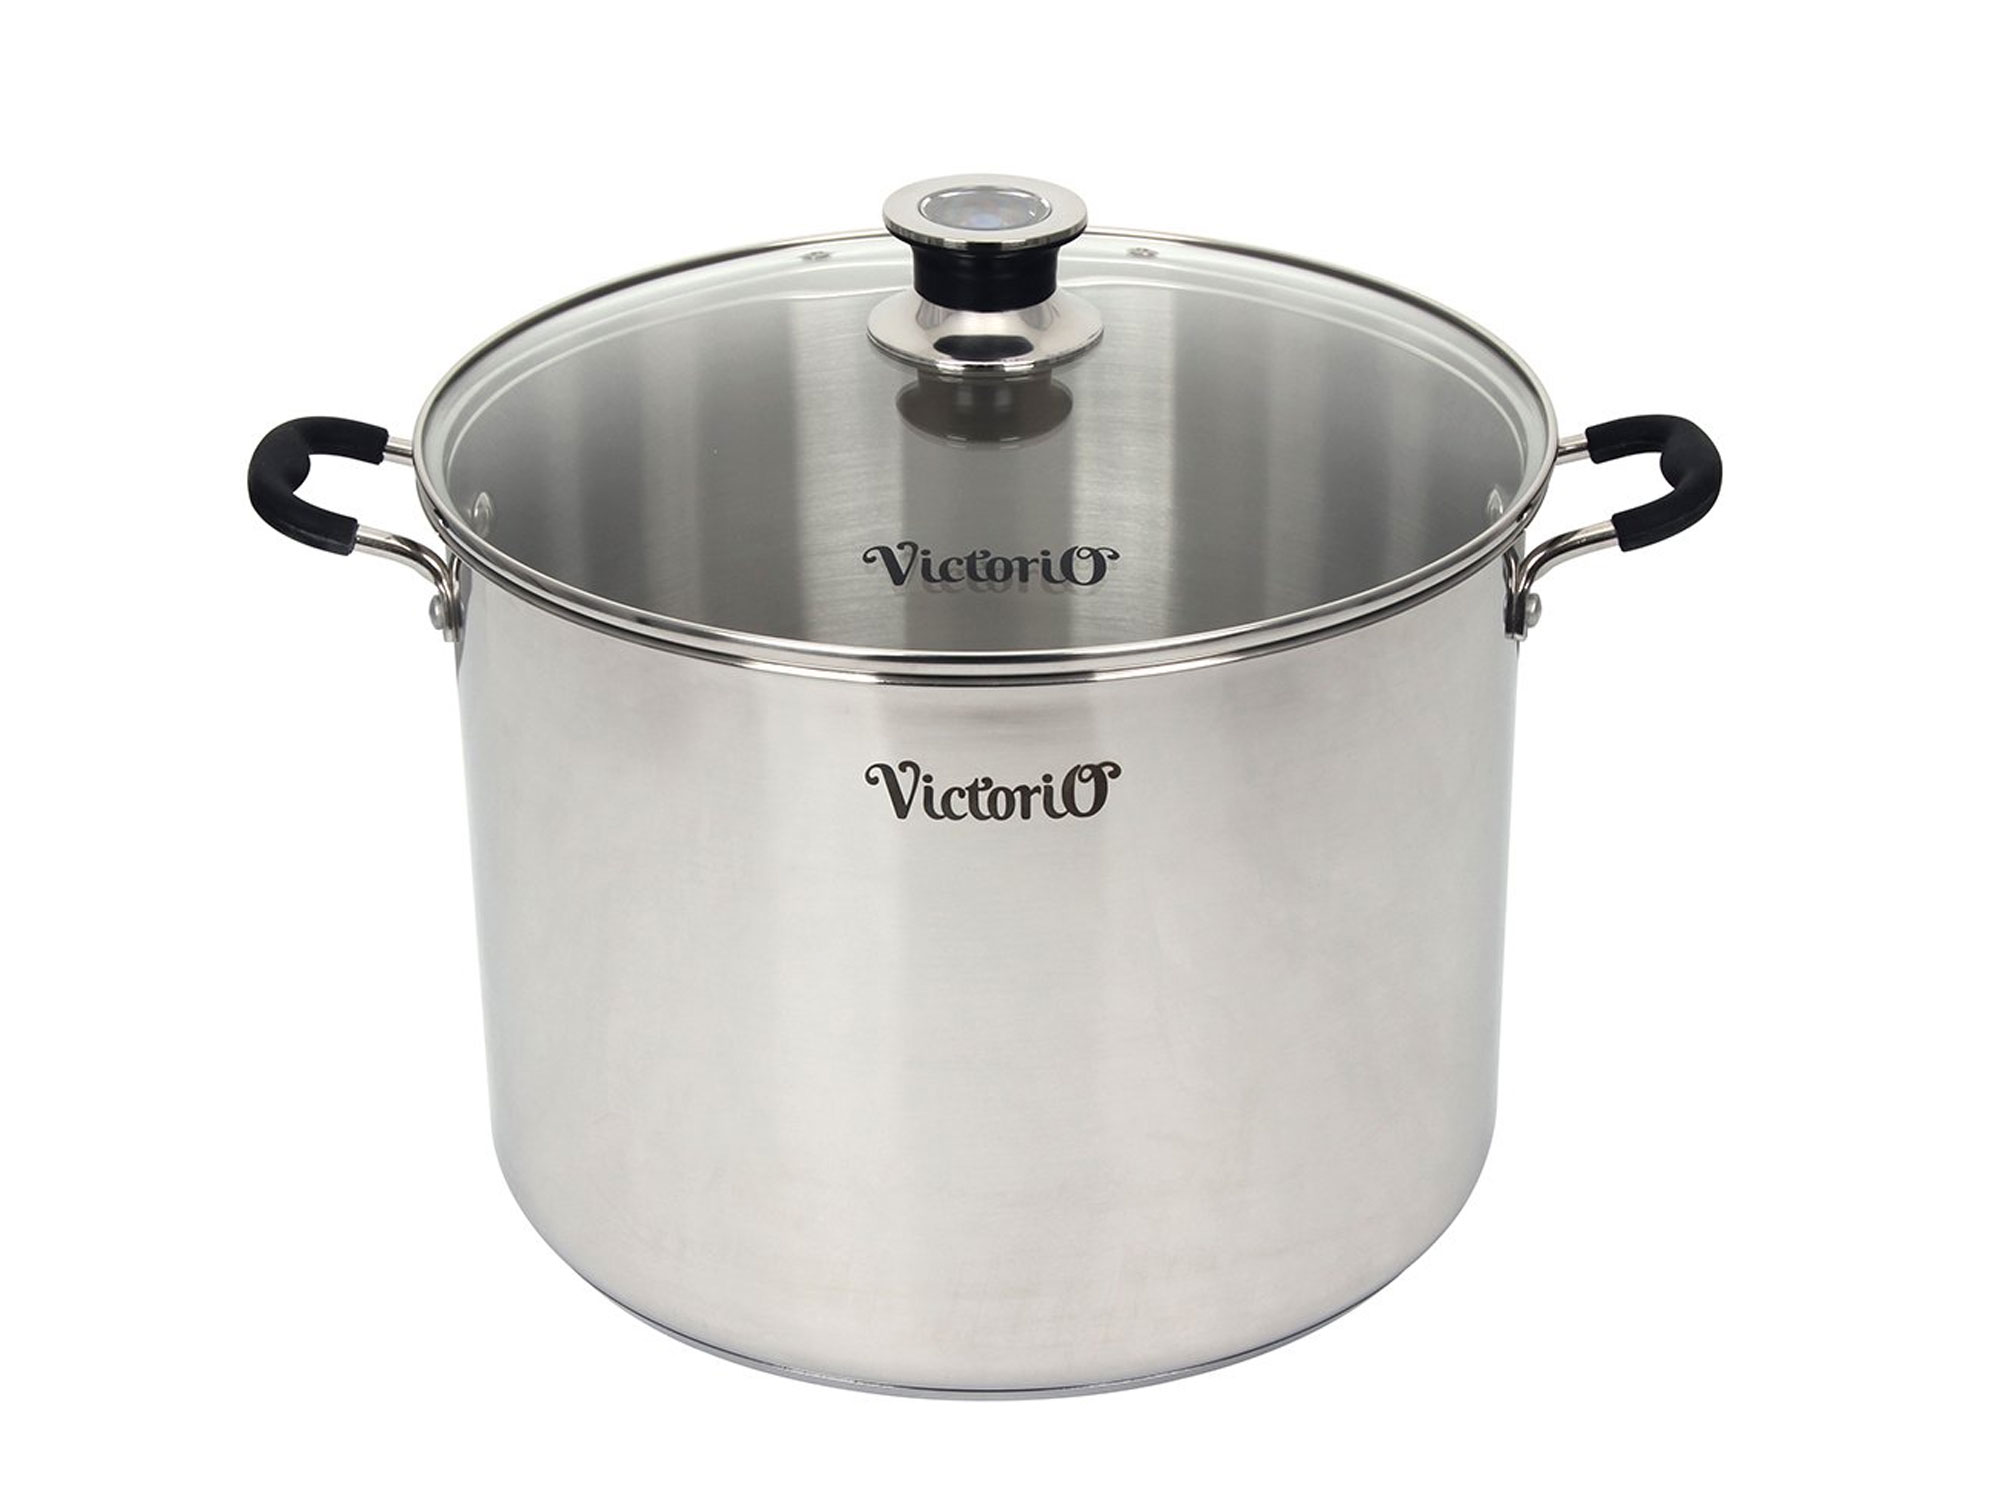 Stainless steel canning pot